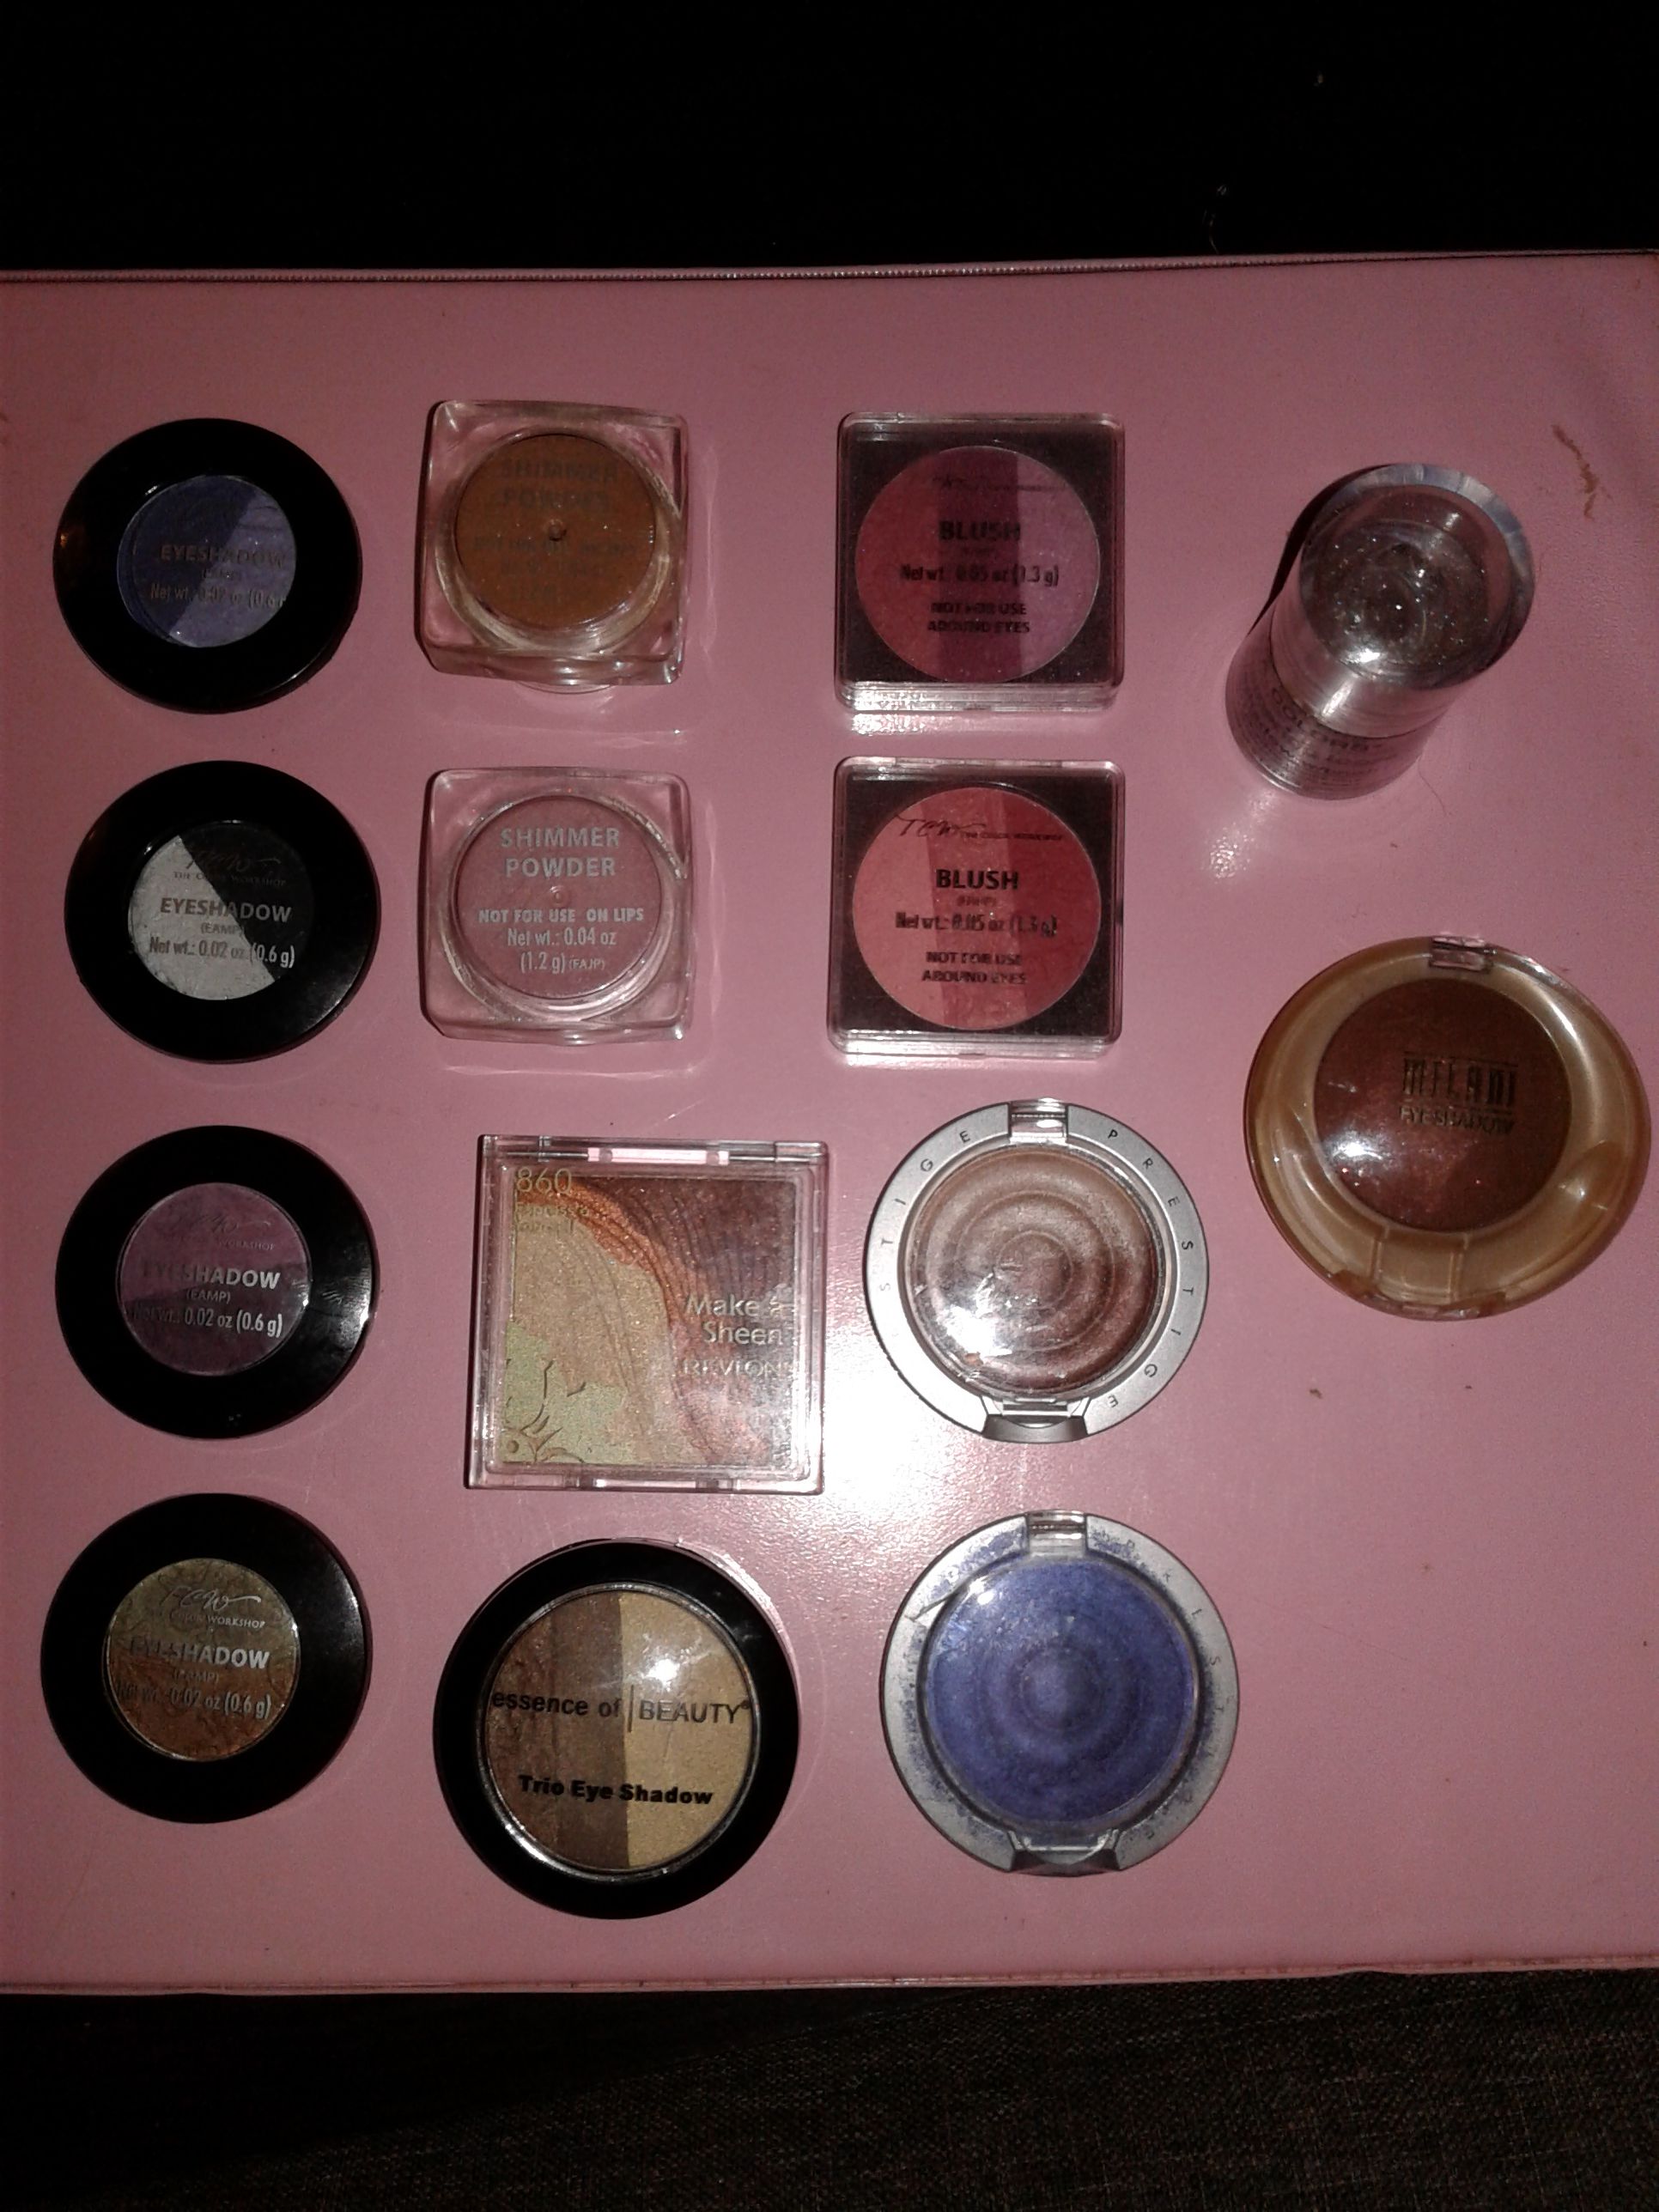 Brand new eyeshadows and blushes